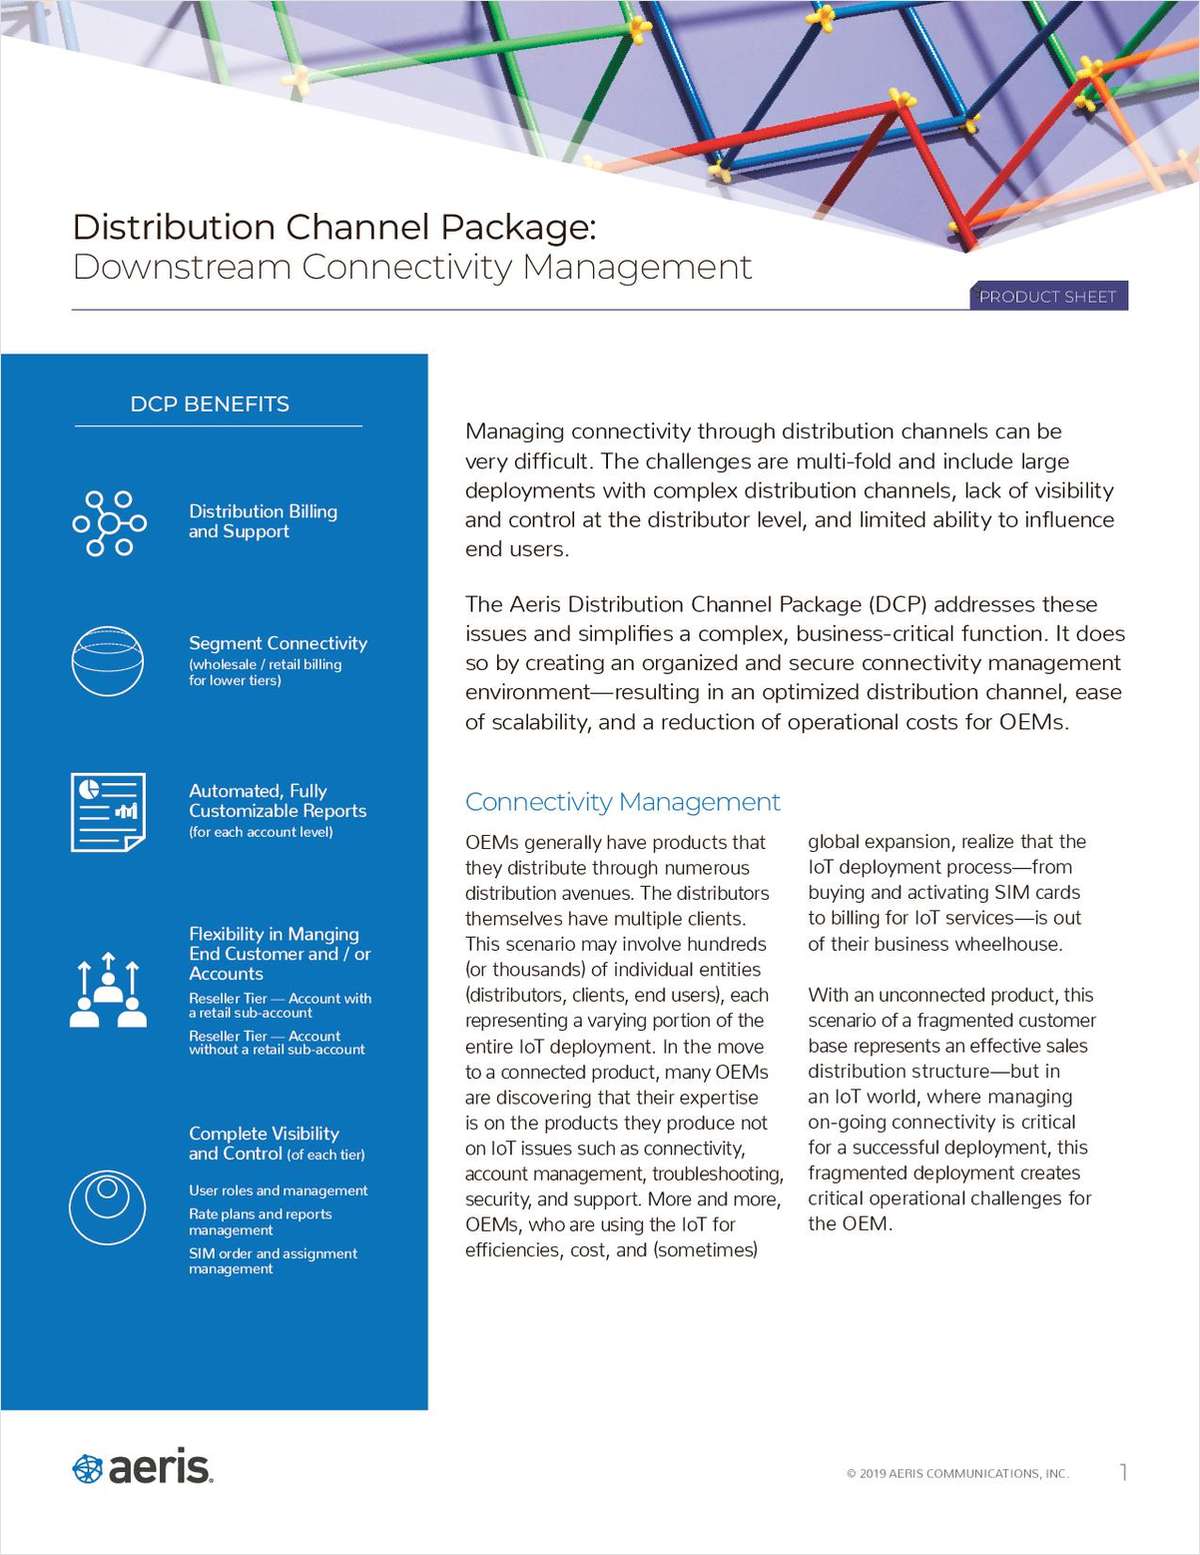 Distribution Channel Package (DCP) -- Downstream Connectivity Management